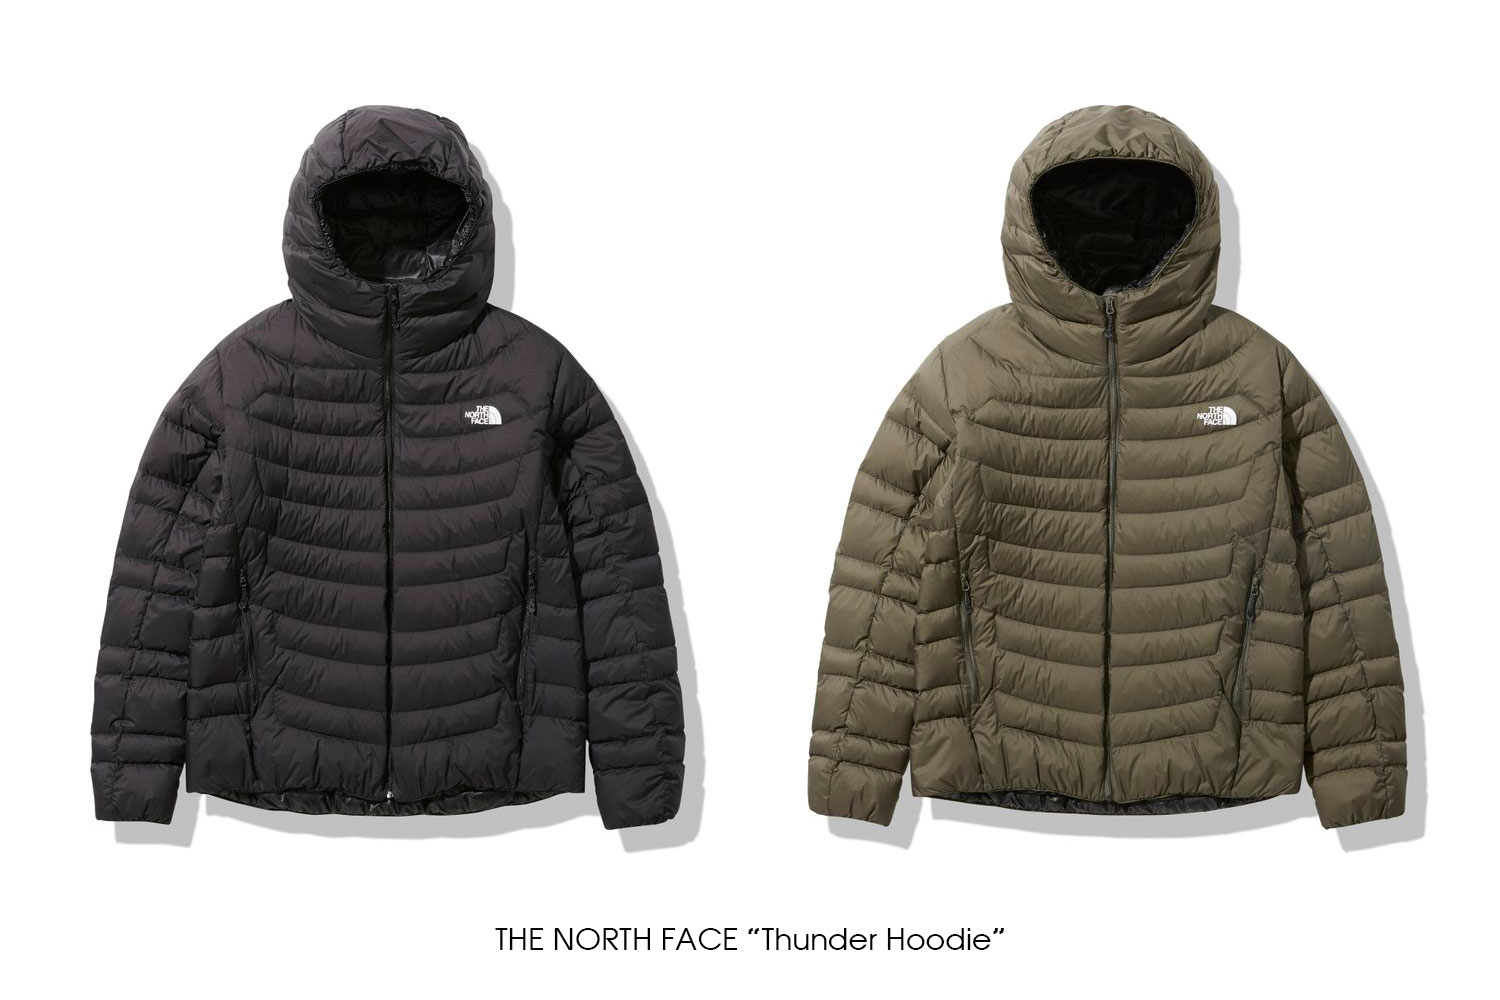 THE NORTH FACE "Thunder Hoodie"